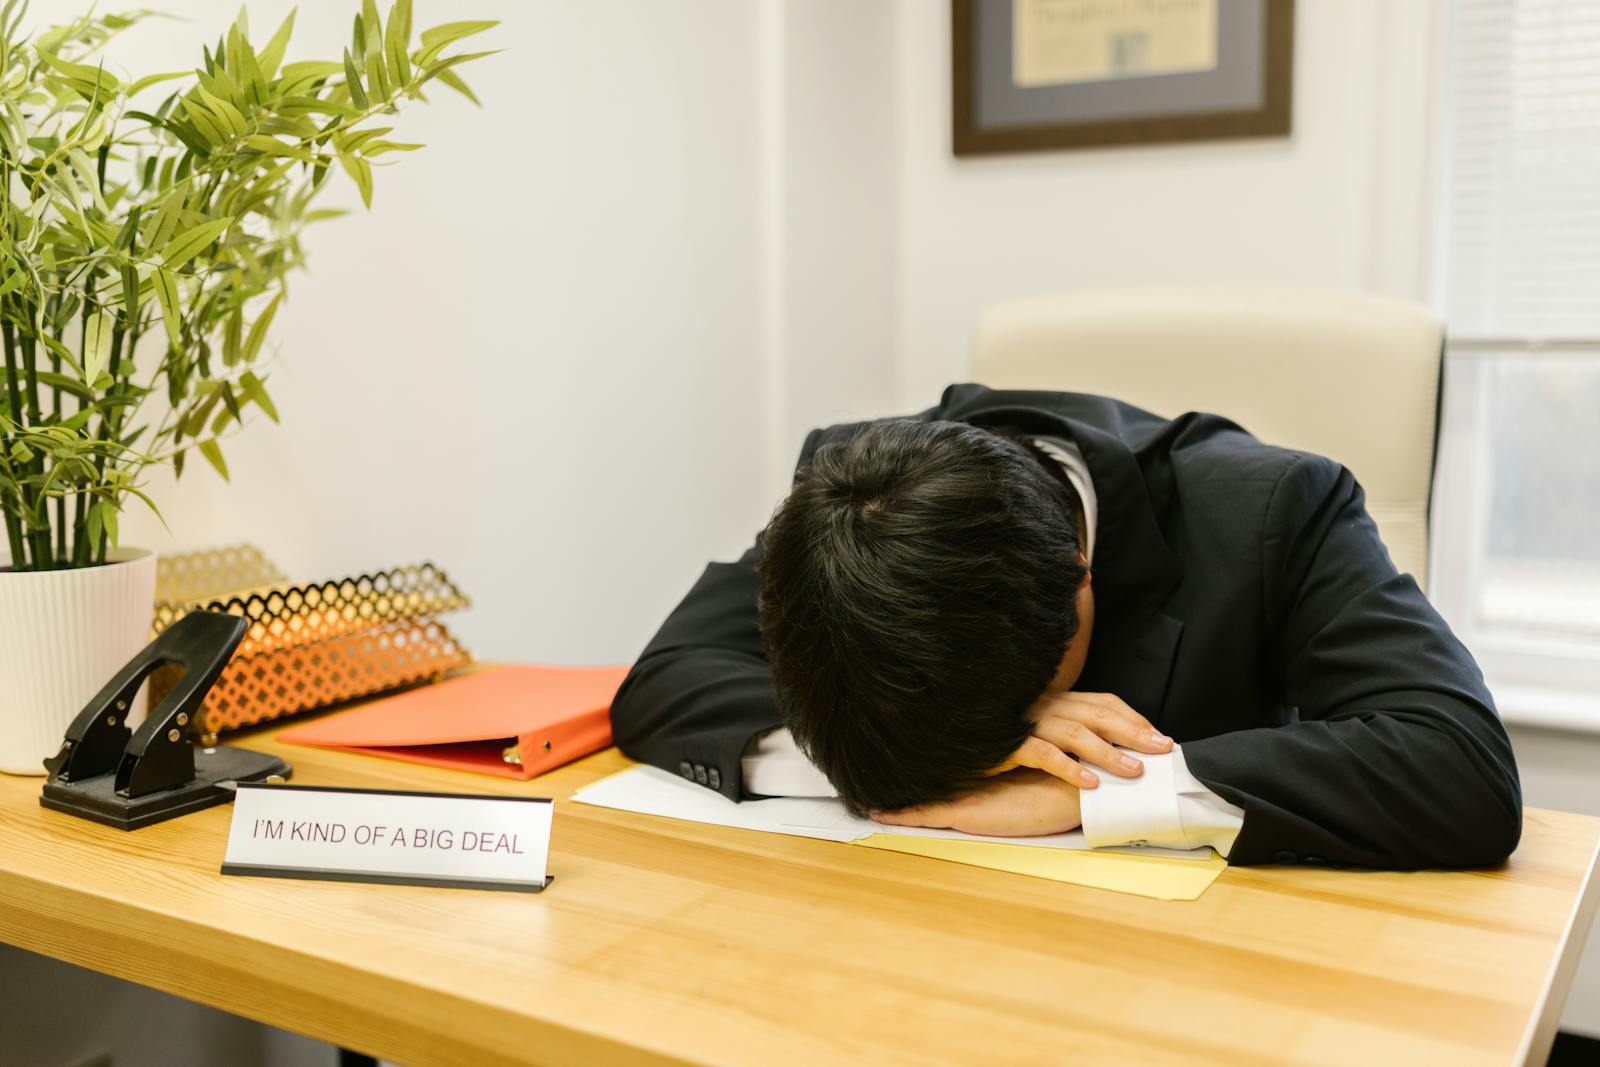 A Man in a Suit Sleeping on the Desk